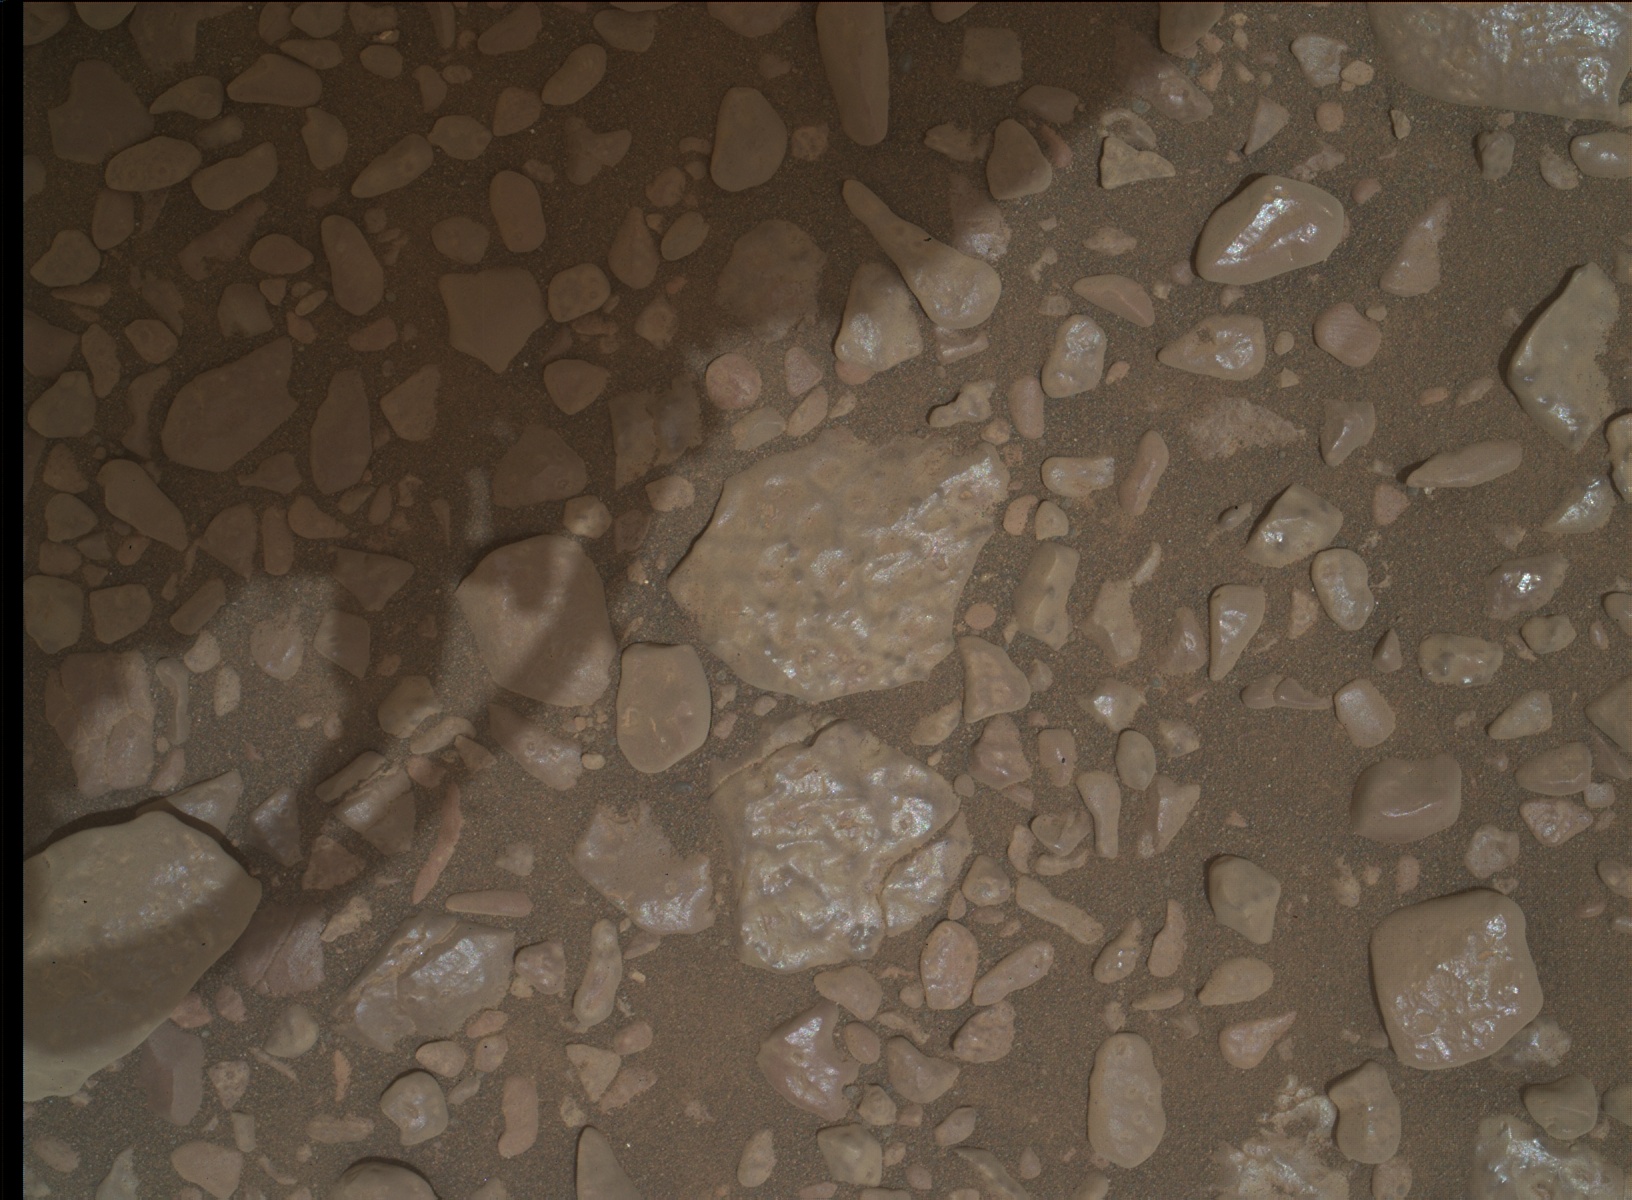 Nasa's Mars rover Curiosity acquired this image using its Mars Hand Lens Imager (MAHLI) on Sol 2972